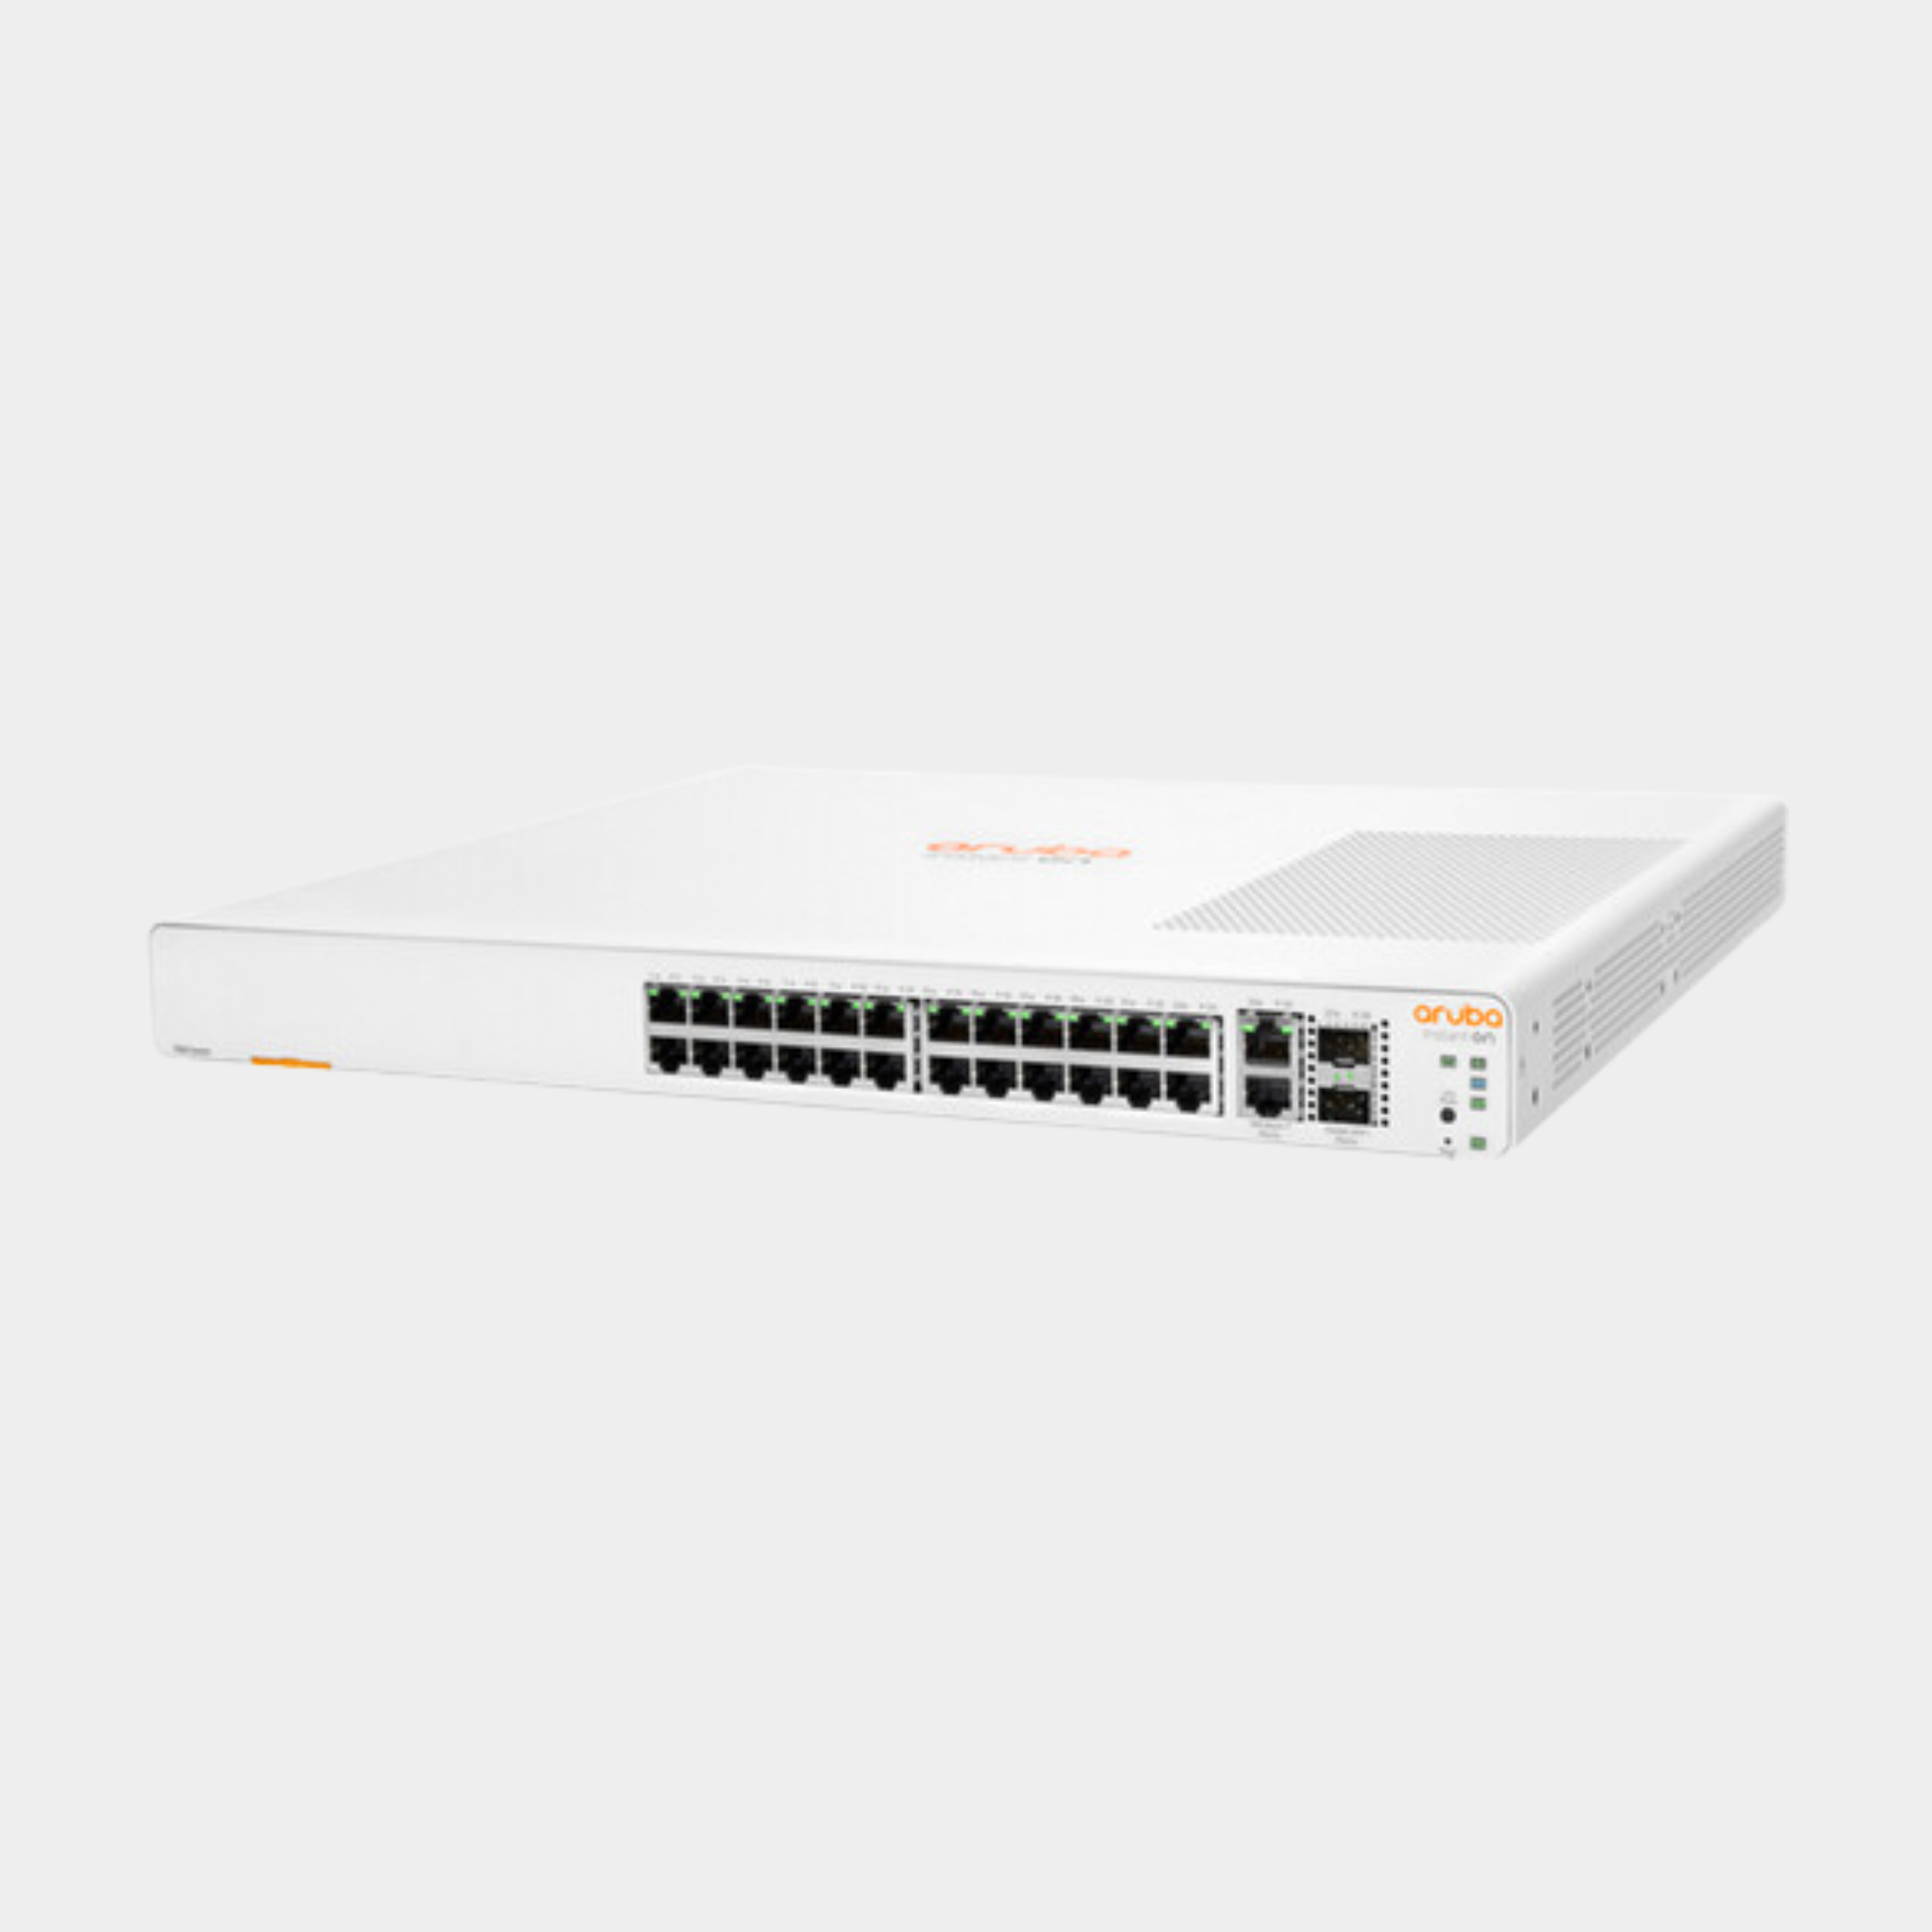 HPE Aruba Instant On 1960 24G 20p Class4 4p Class6 PoE 2XGT 2SFP+ 370W Switch (JL807A) | Limited Lifetime Protection